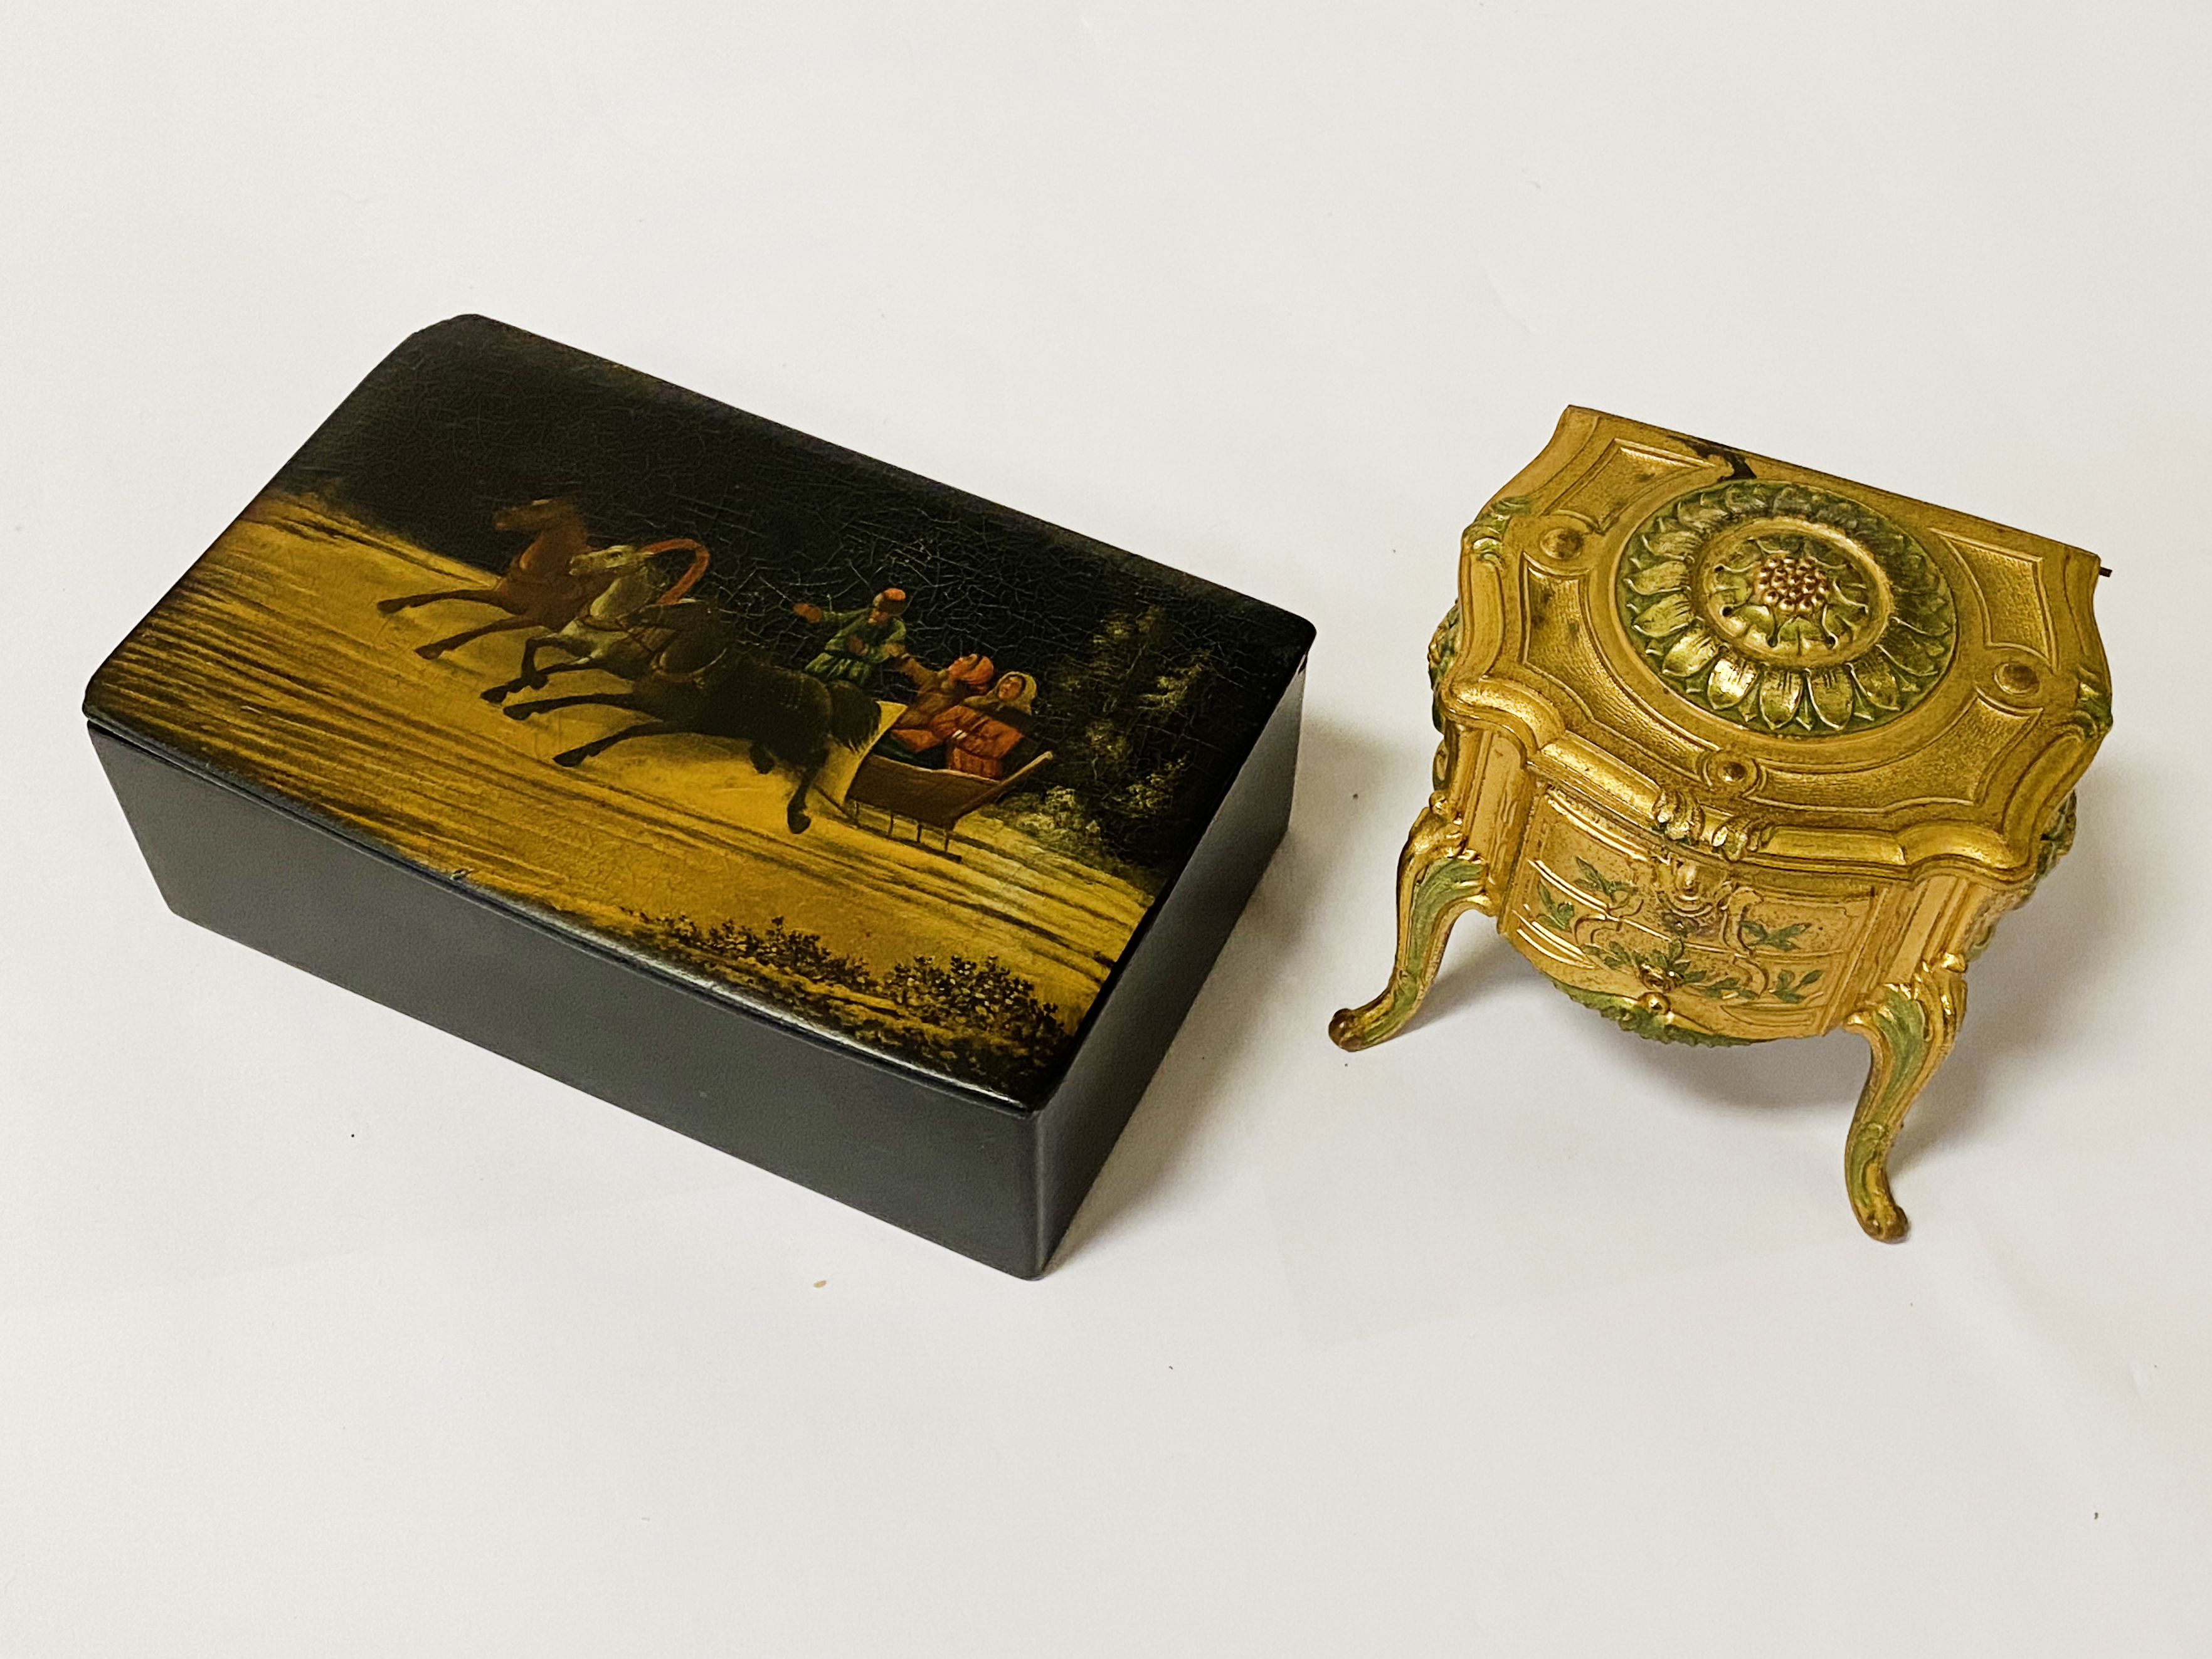 HAND PAINTED RUSSIAN BOX &GILT CASKET, 7 HAND PAINTED MEISSEN PLATES - Image 2 of 2